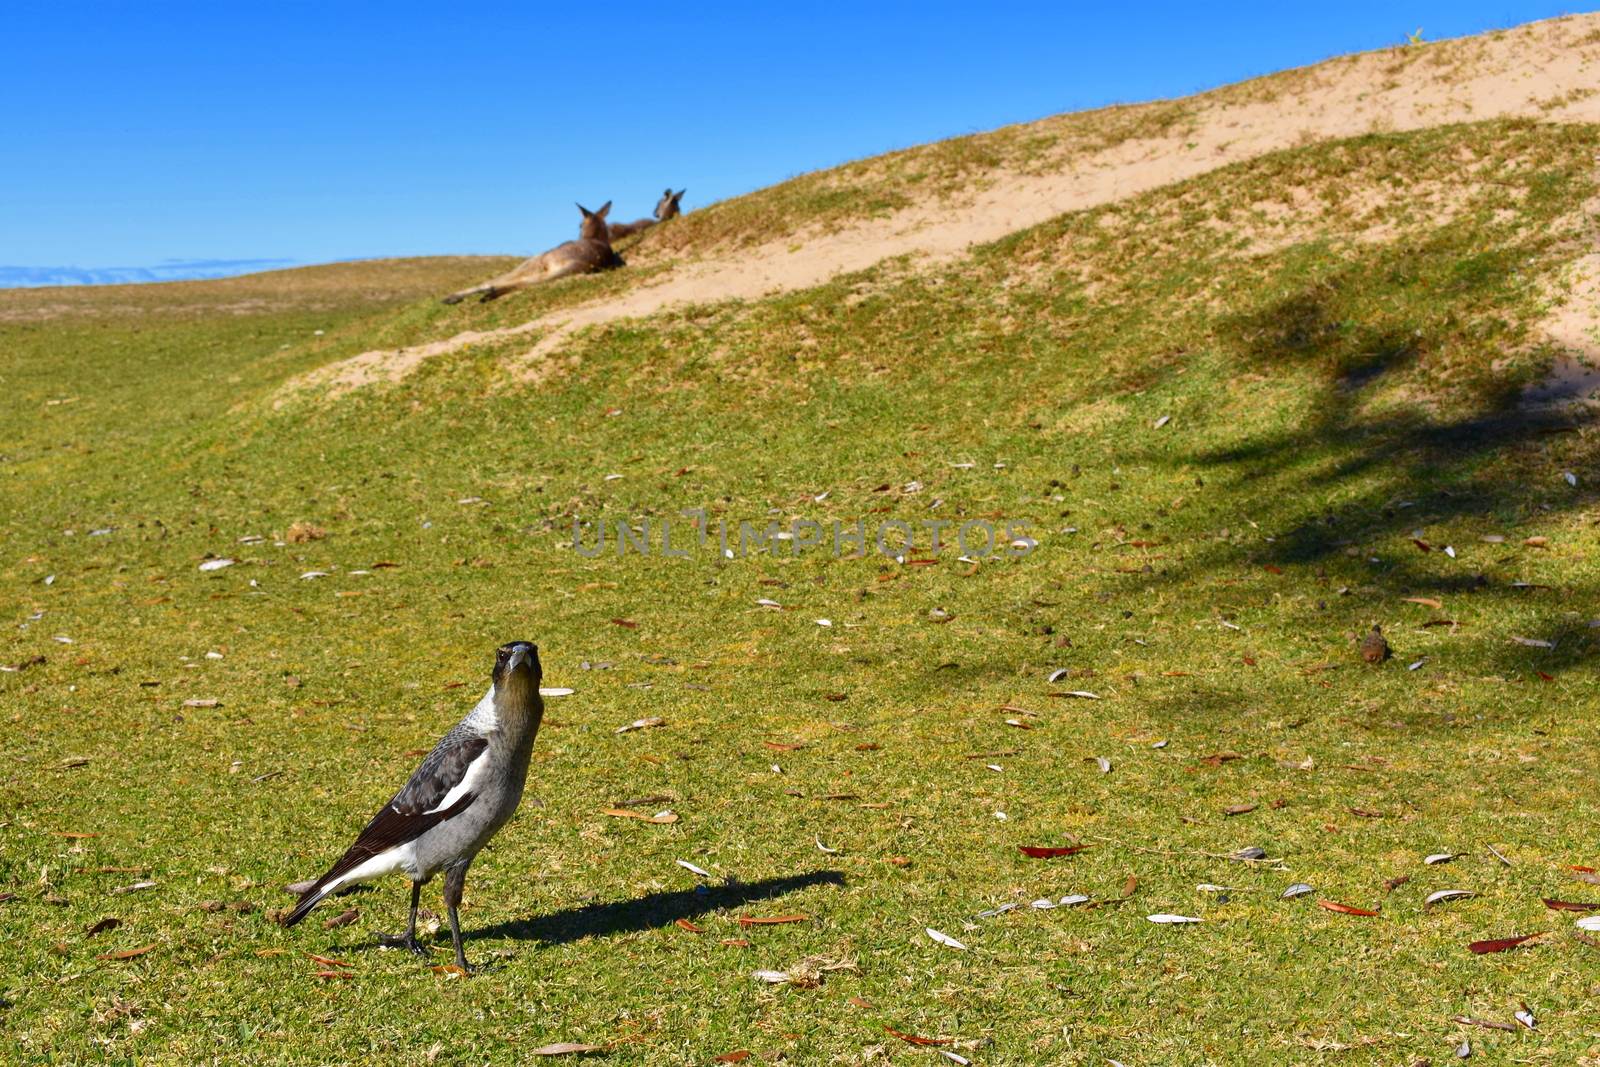 An angry magpie looking at the camera with kangaroos behind it